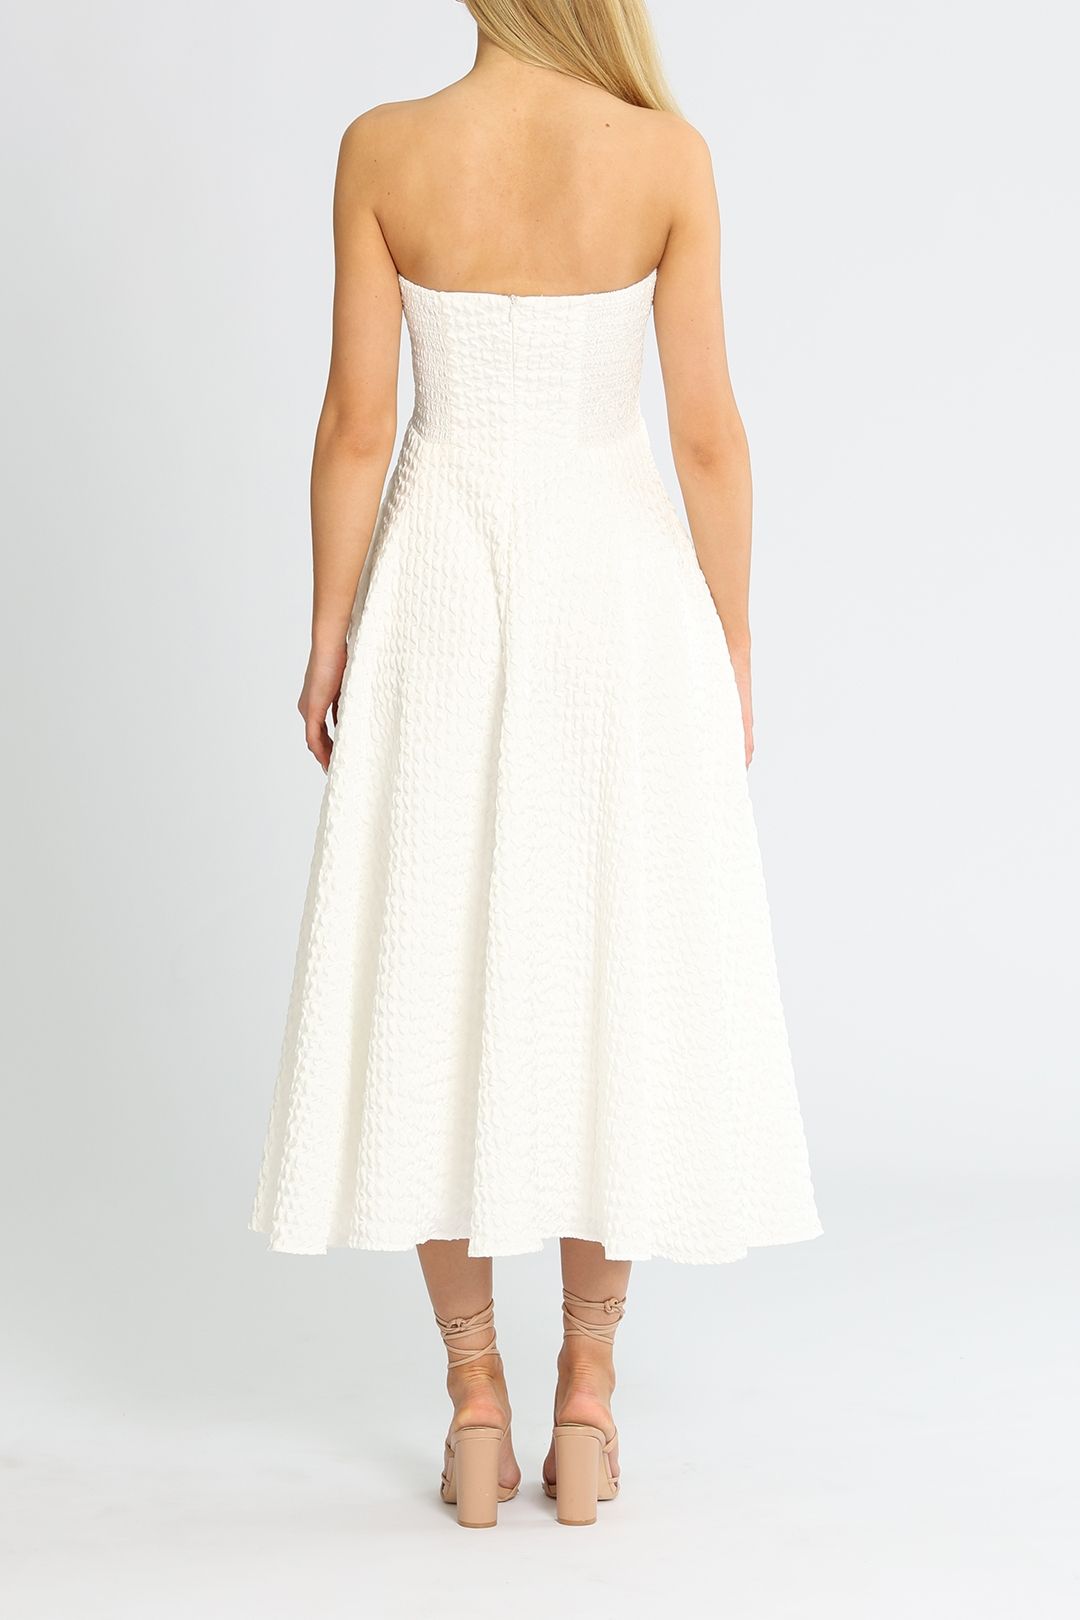 By Johnny Carrie Strapless Dress midi